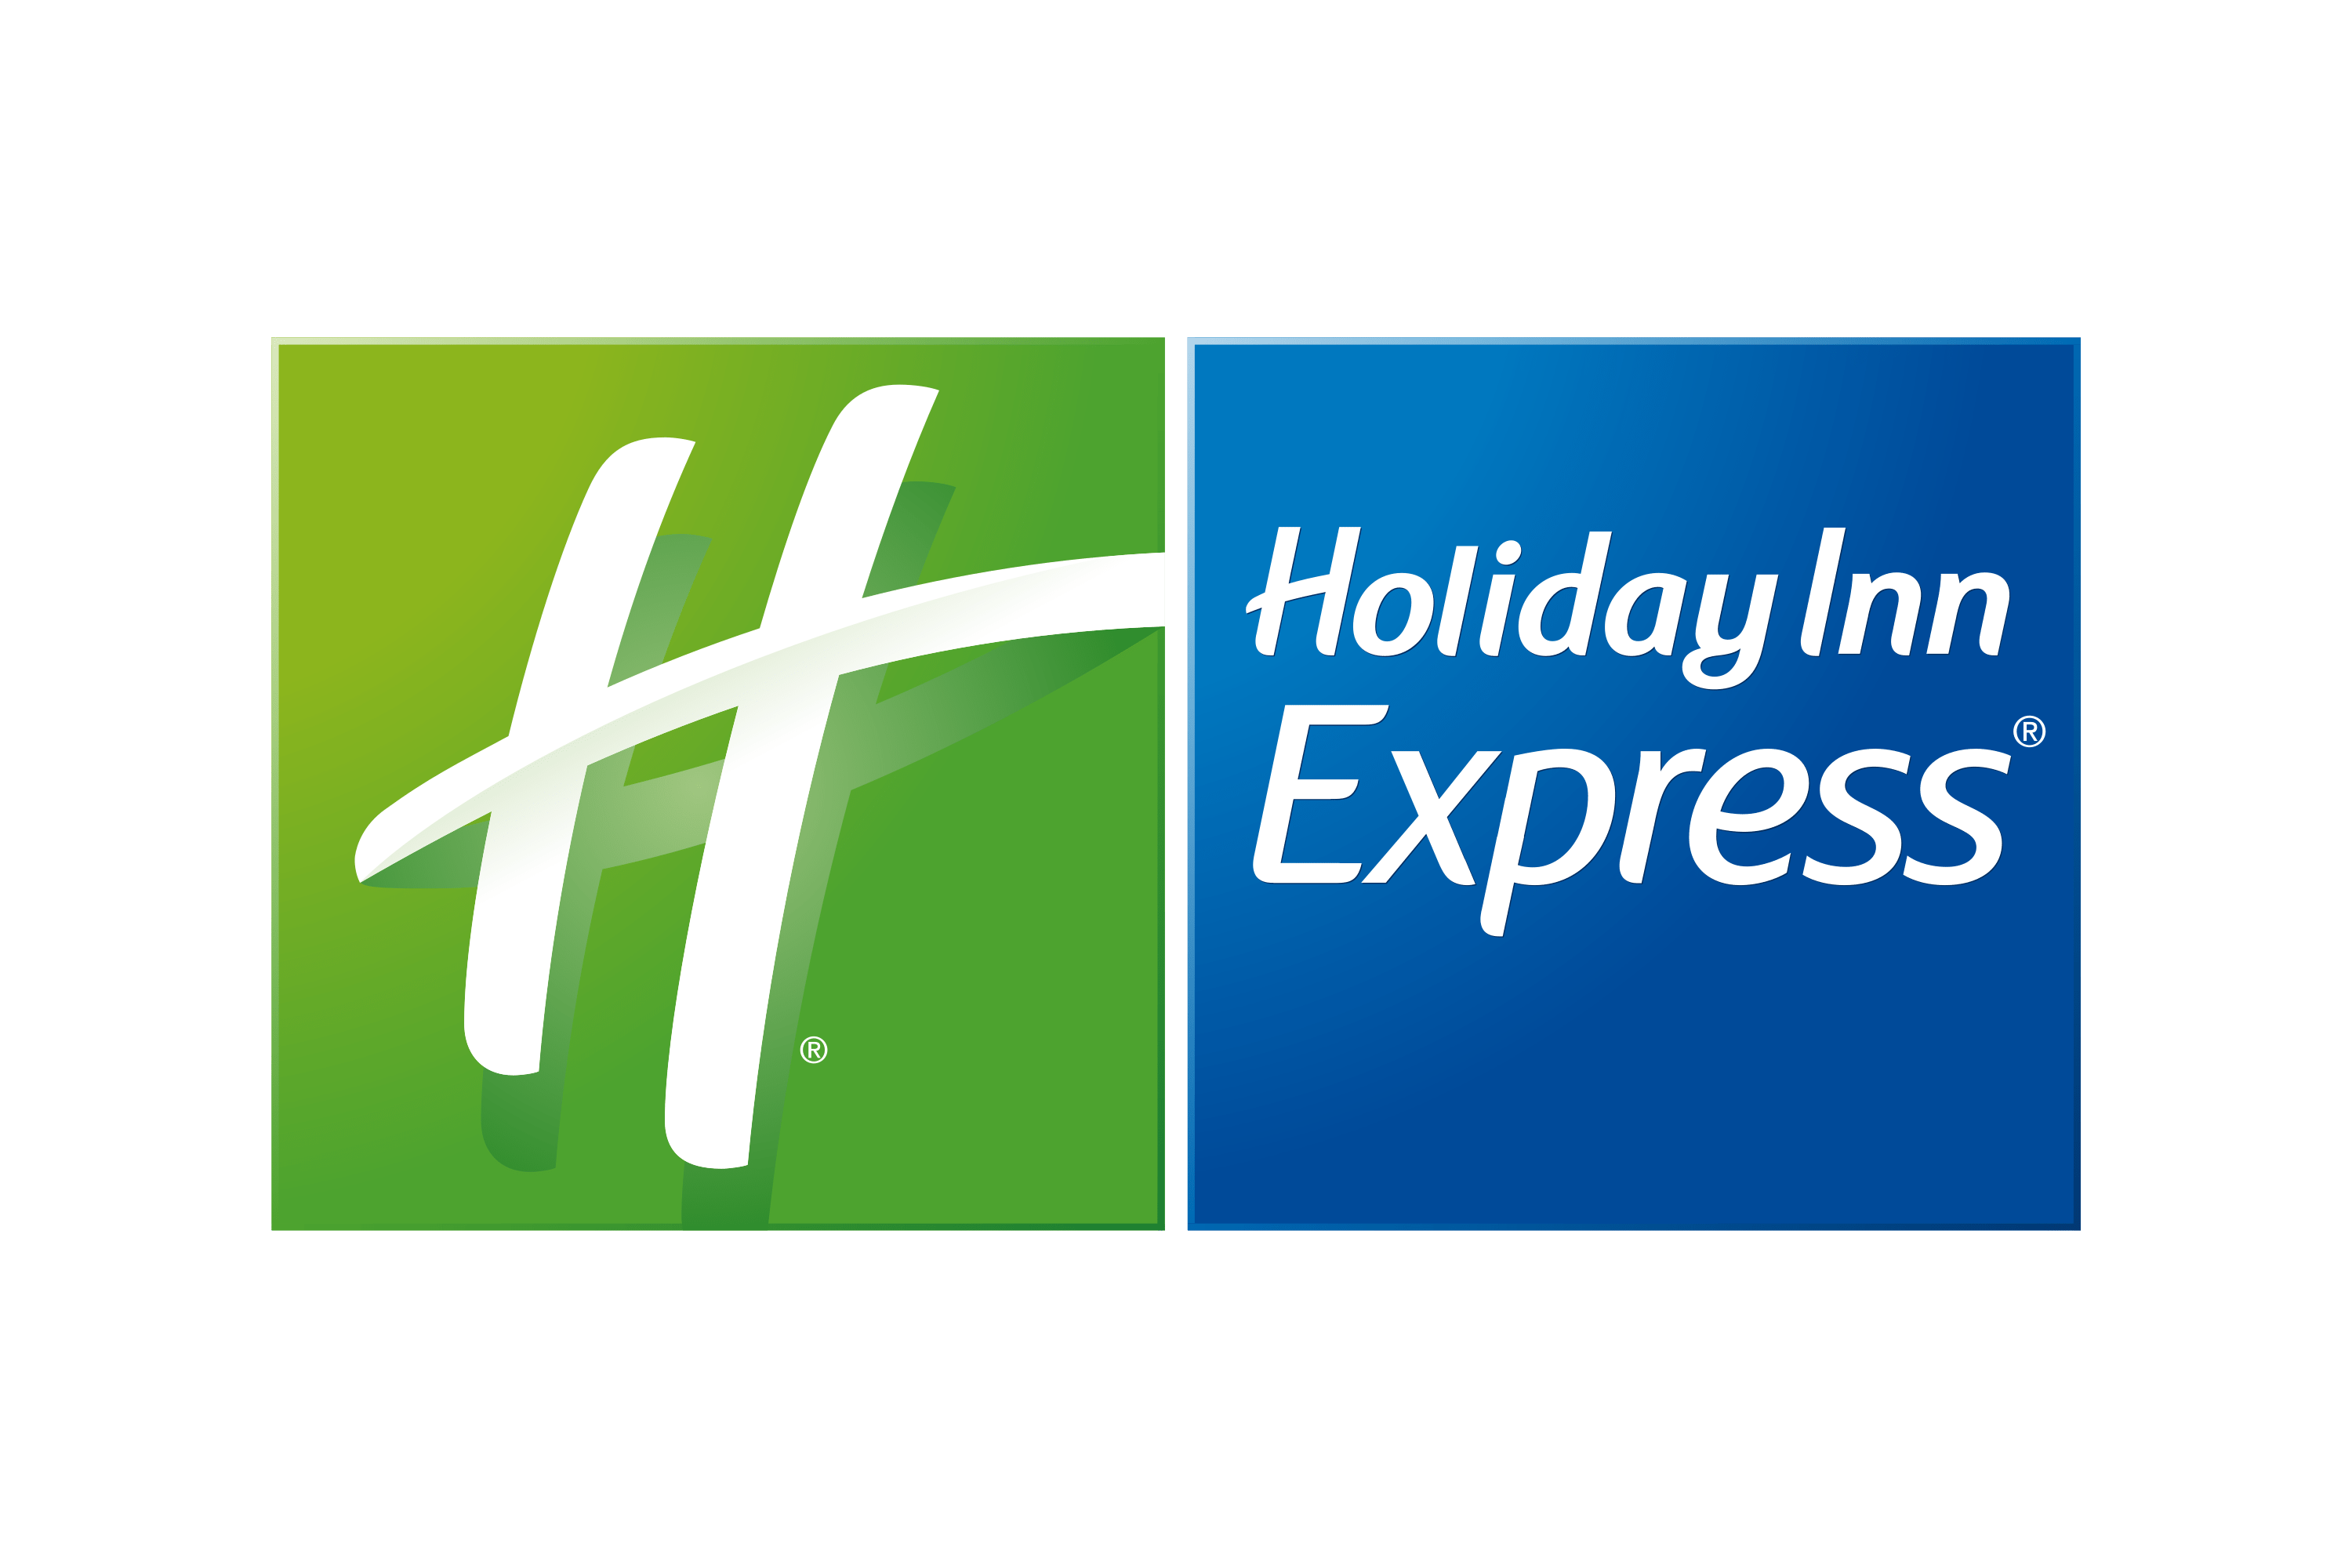 Download Holiday Inn Express Logo in SVG Vector or PNG File Format